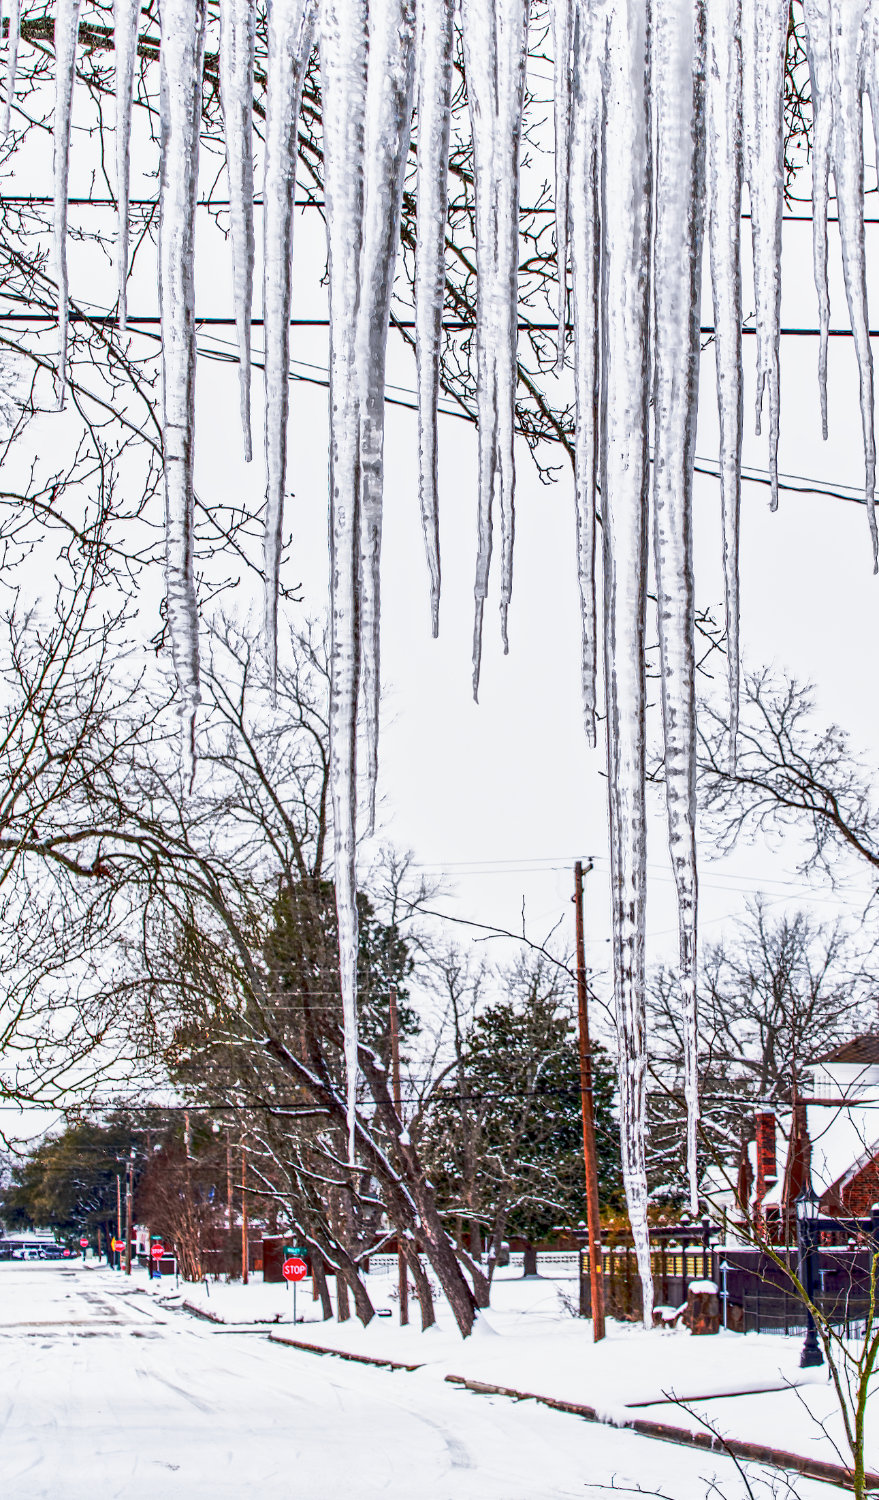 Icicles formed on awnings, roofs, and wires across Wood County and much of Texas, just as these in Mineola had by last Thursday. [get this photo]